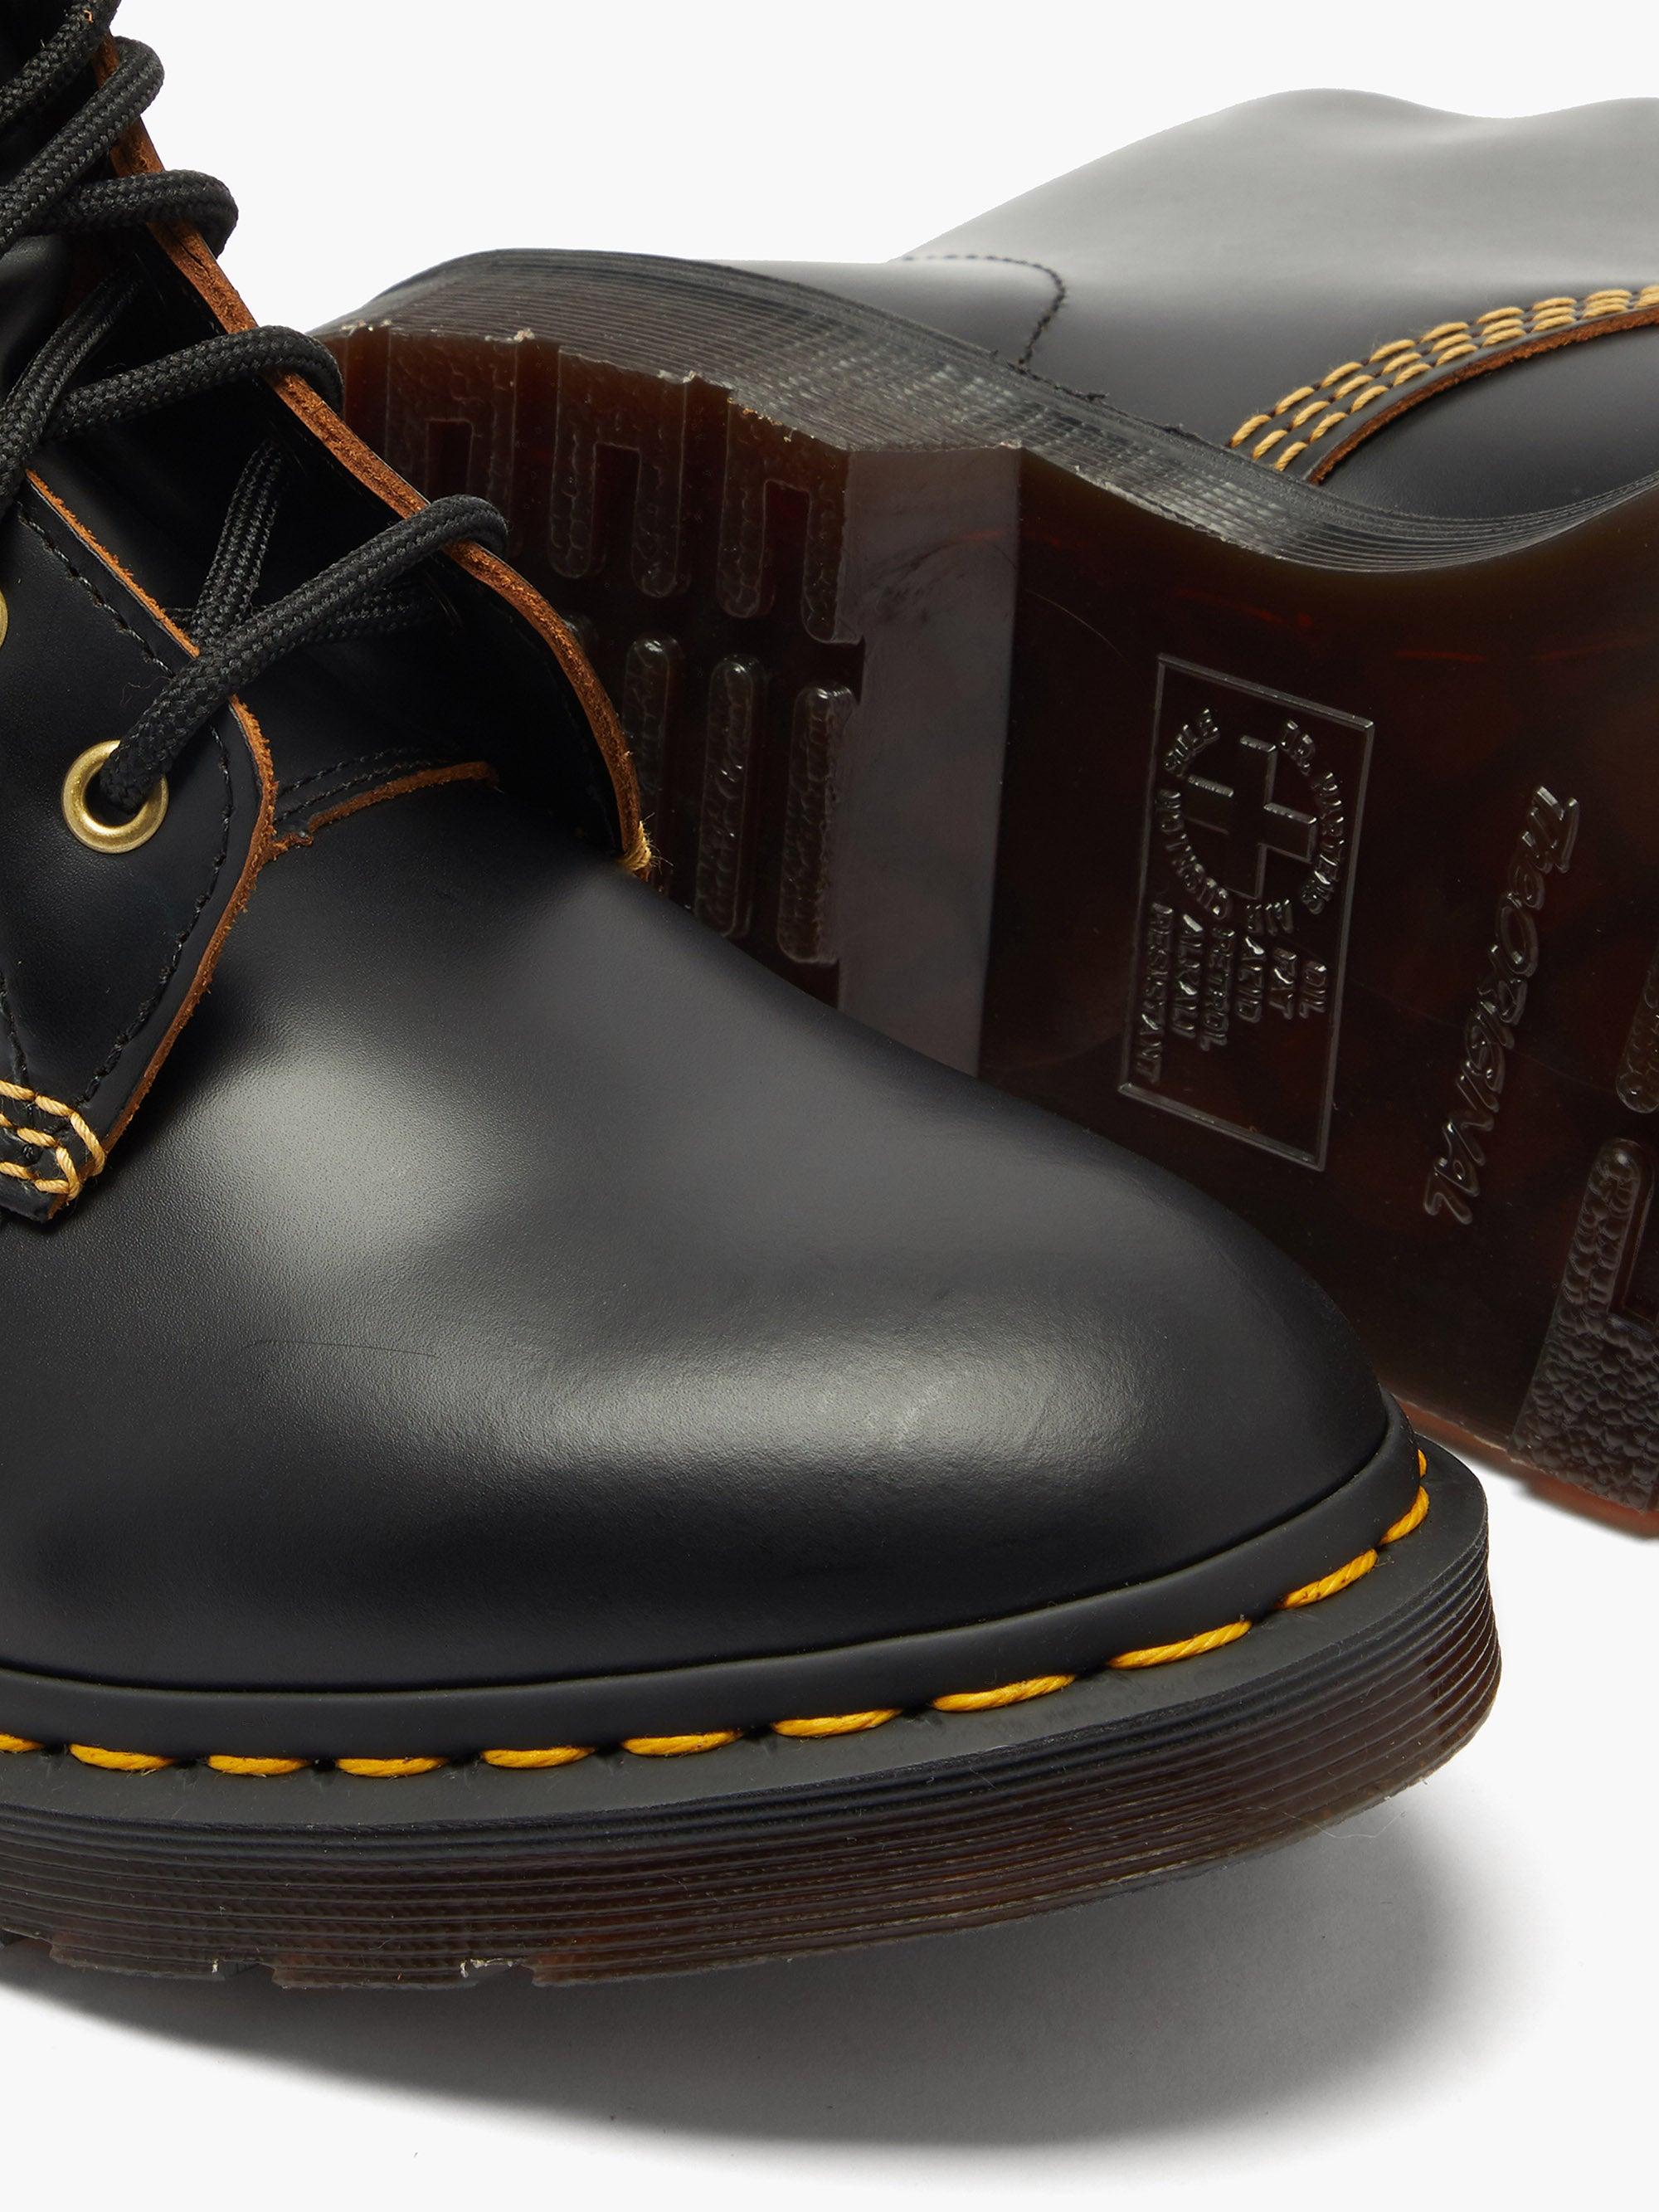 Dr. Martens 101 Archive Leather Ankle Boots in Black for Men - Lyst